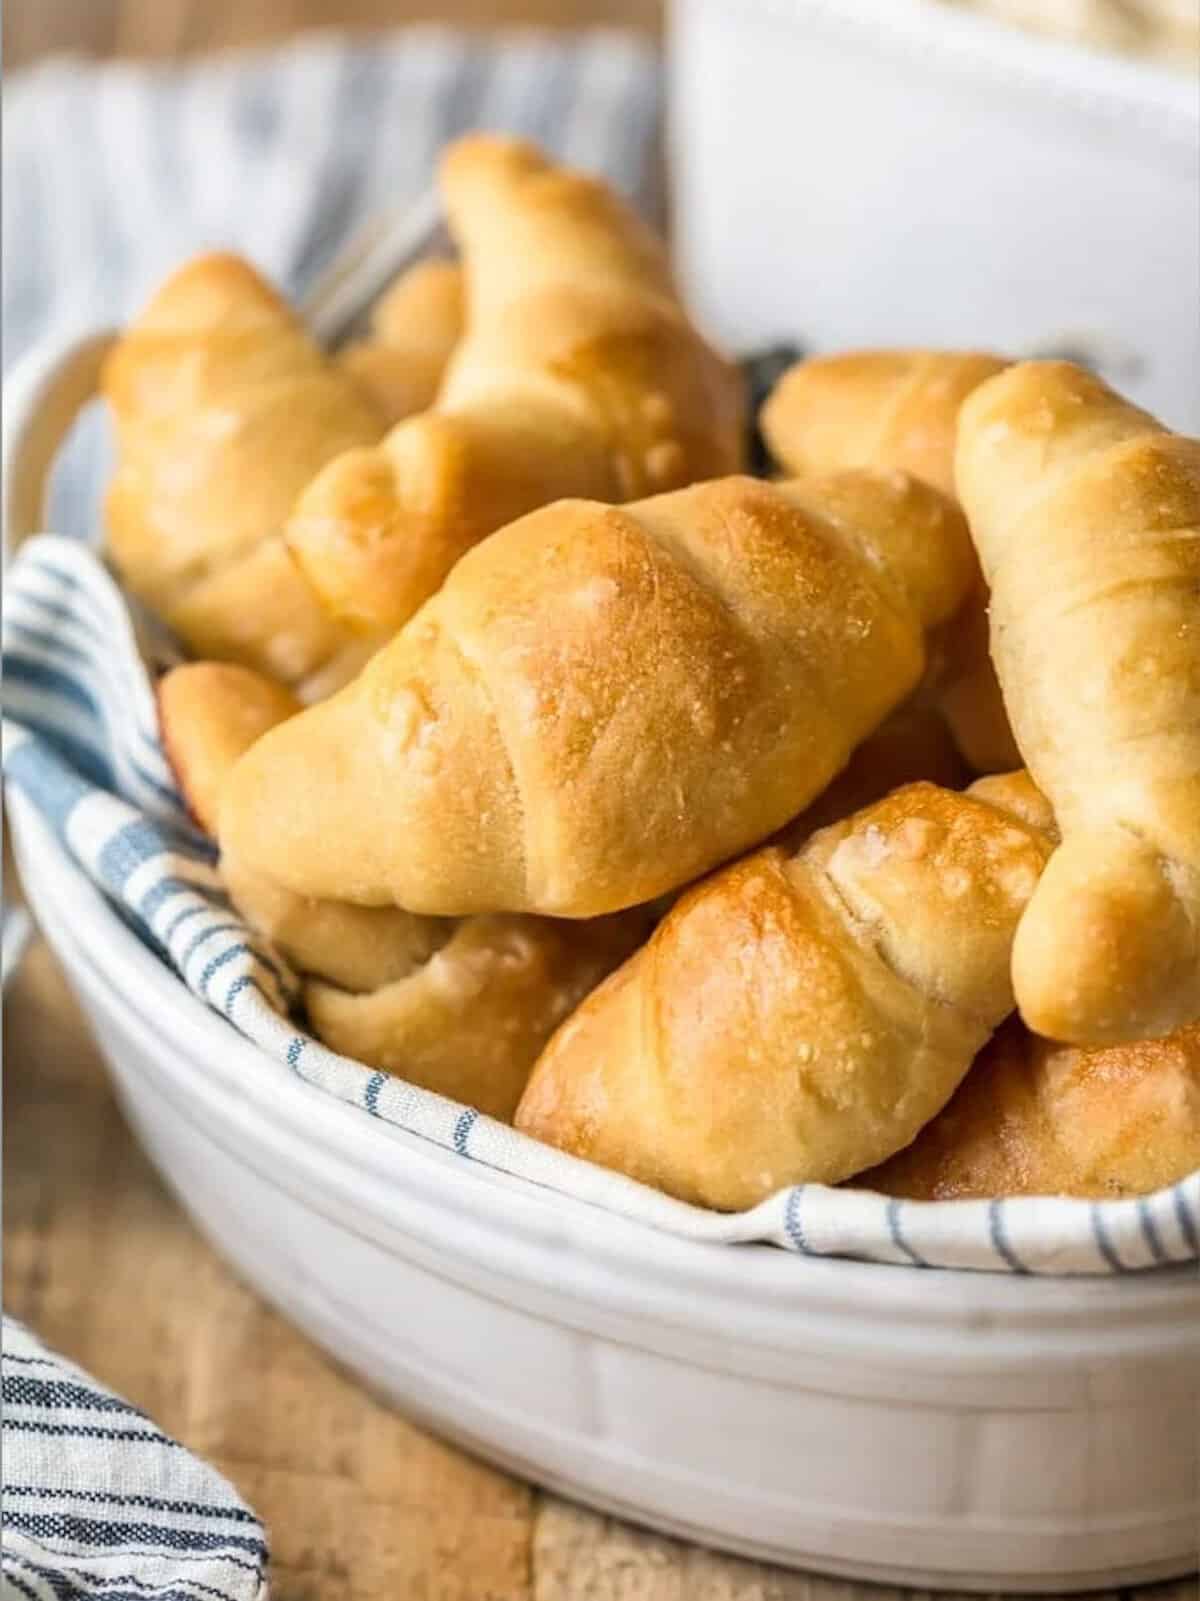 Homemade crescent rolls in a white bowl on a wooden table.